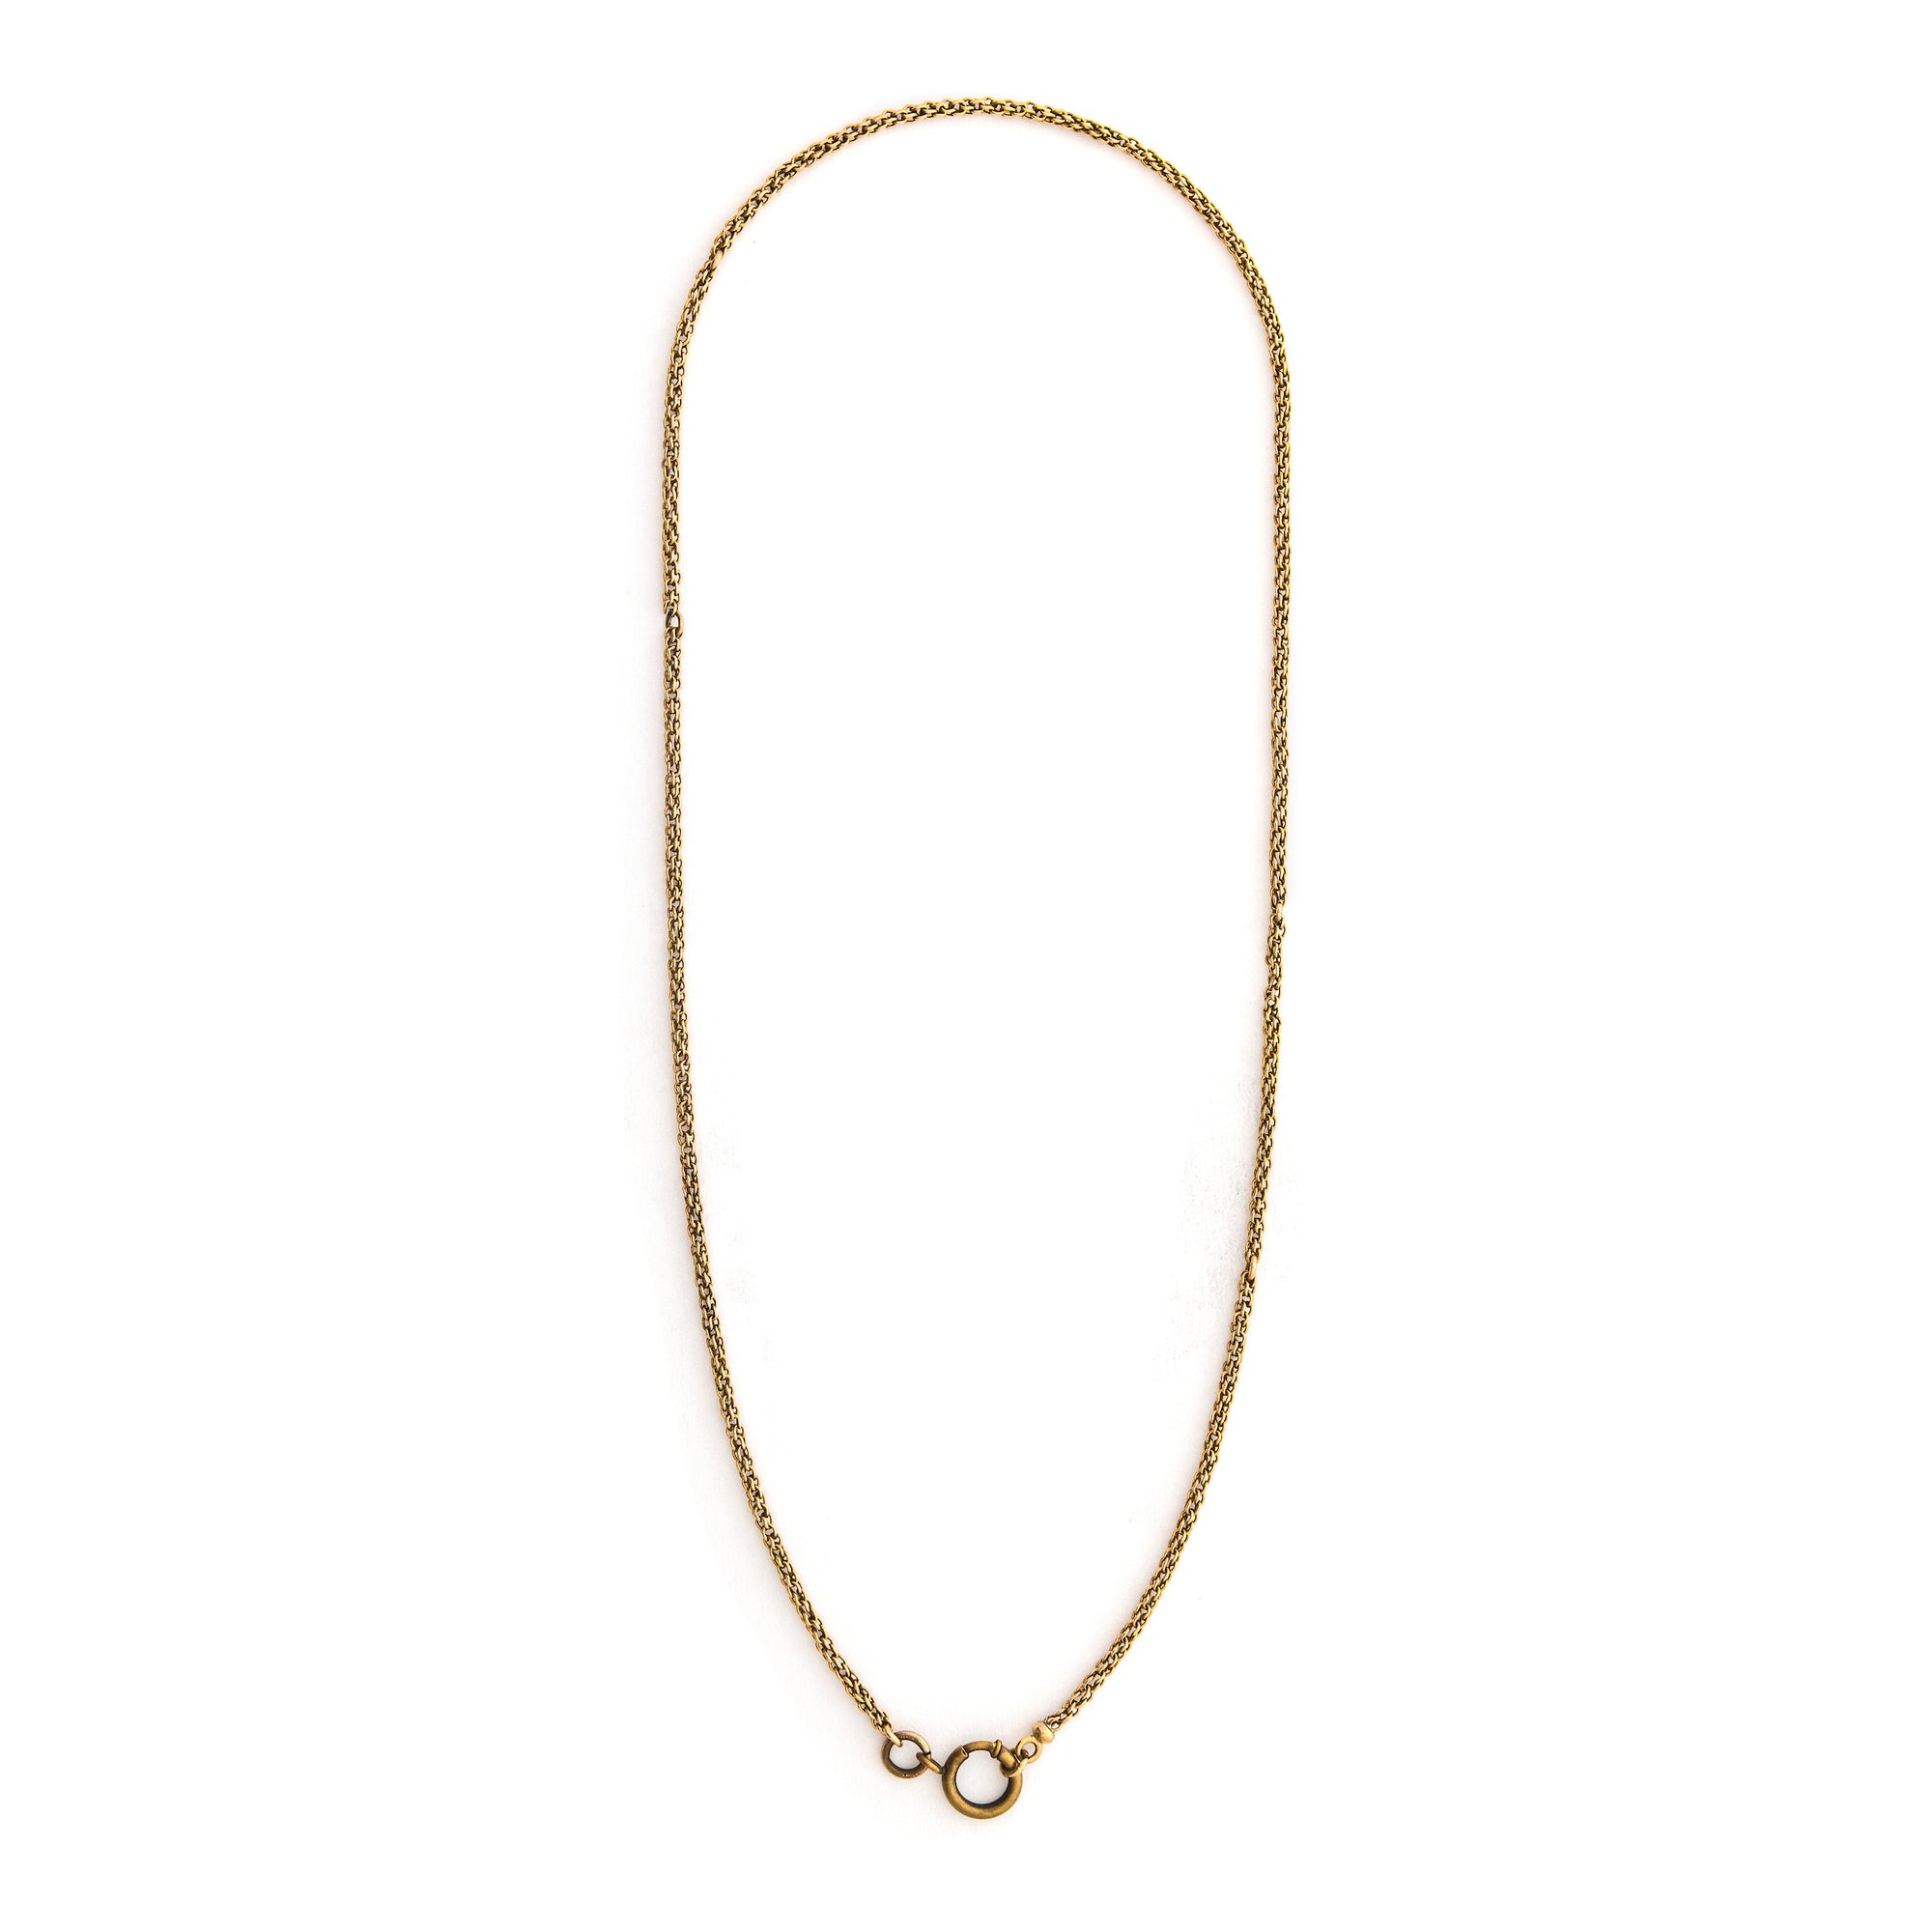 This gold fill antique round wheat chain is the perfect addition to any jewelry lovers collection. It can be worn alone, with charms or a locket, or layered with other chains for a bold statement. A true staple! Close up view